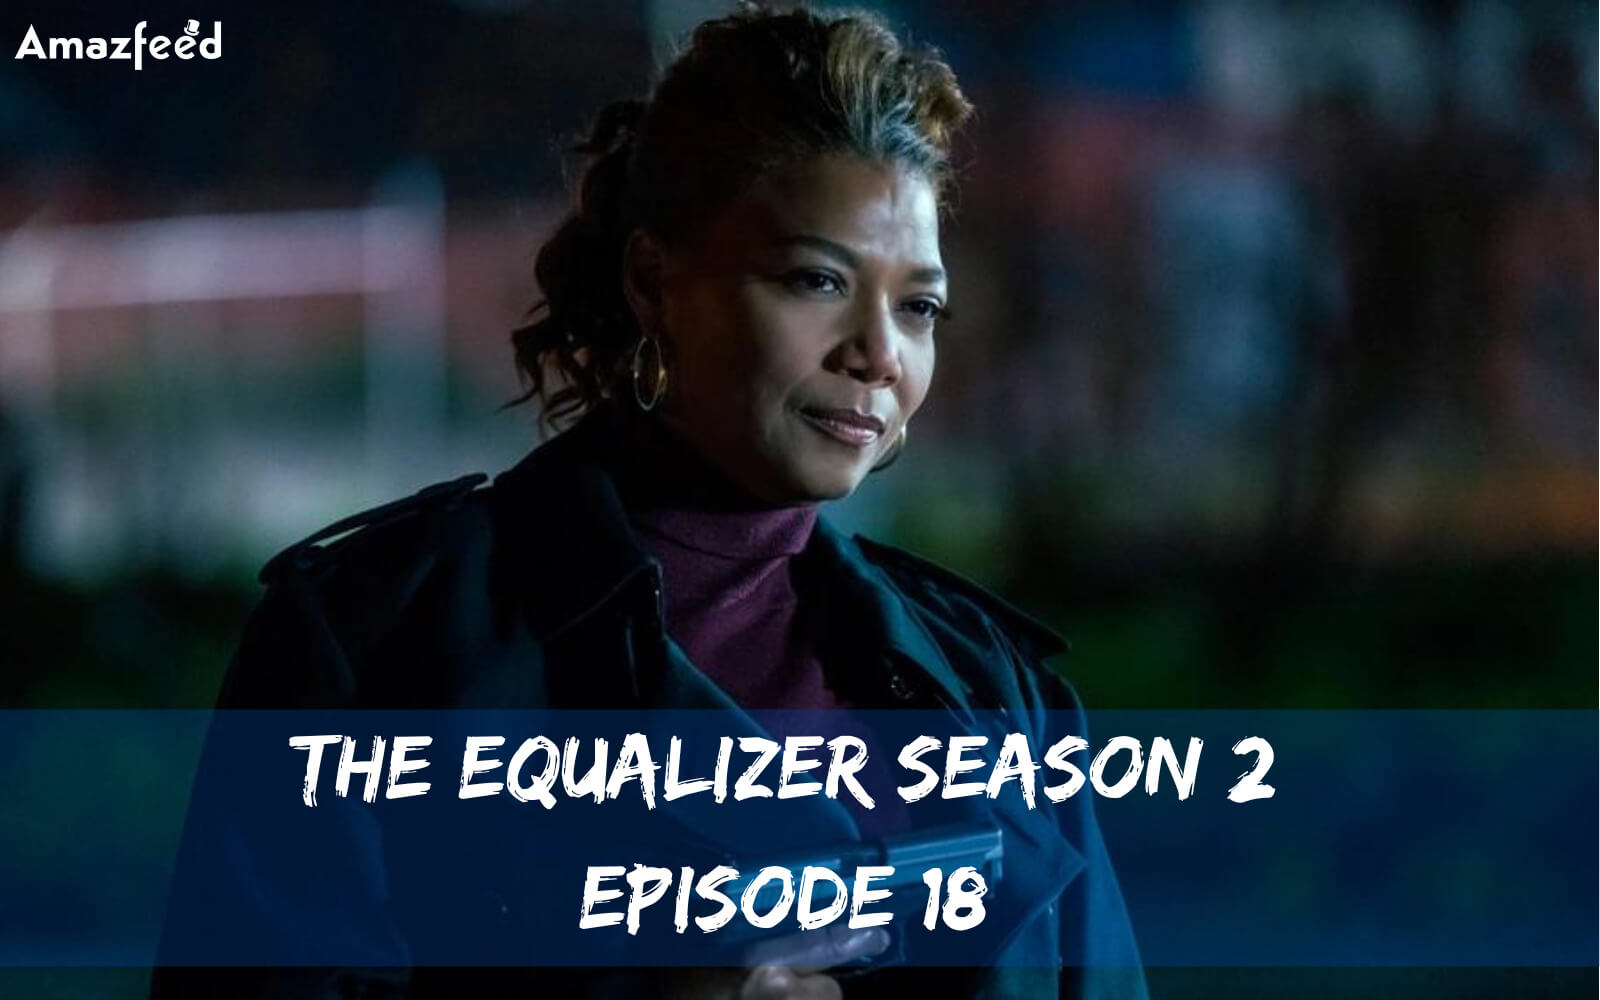 The Equalizer Season 2 Episode 18 RELEASE DATE (1)